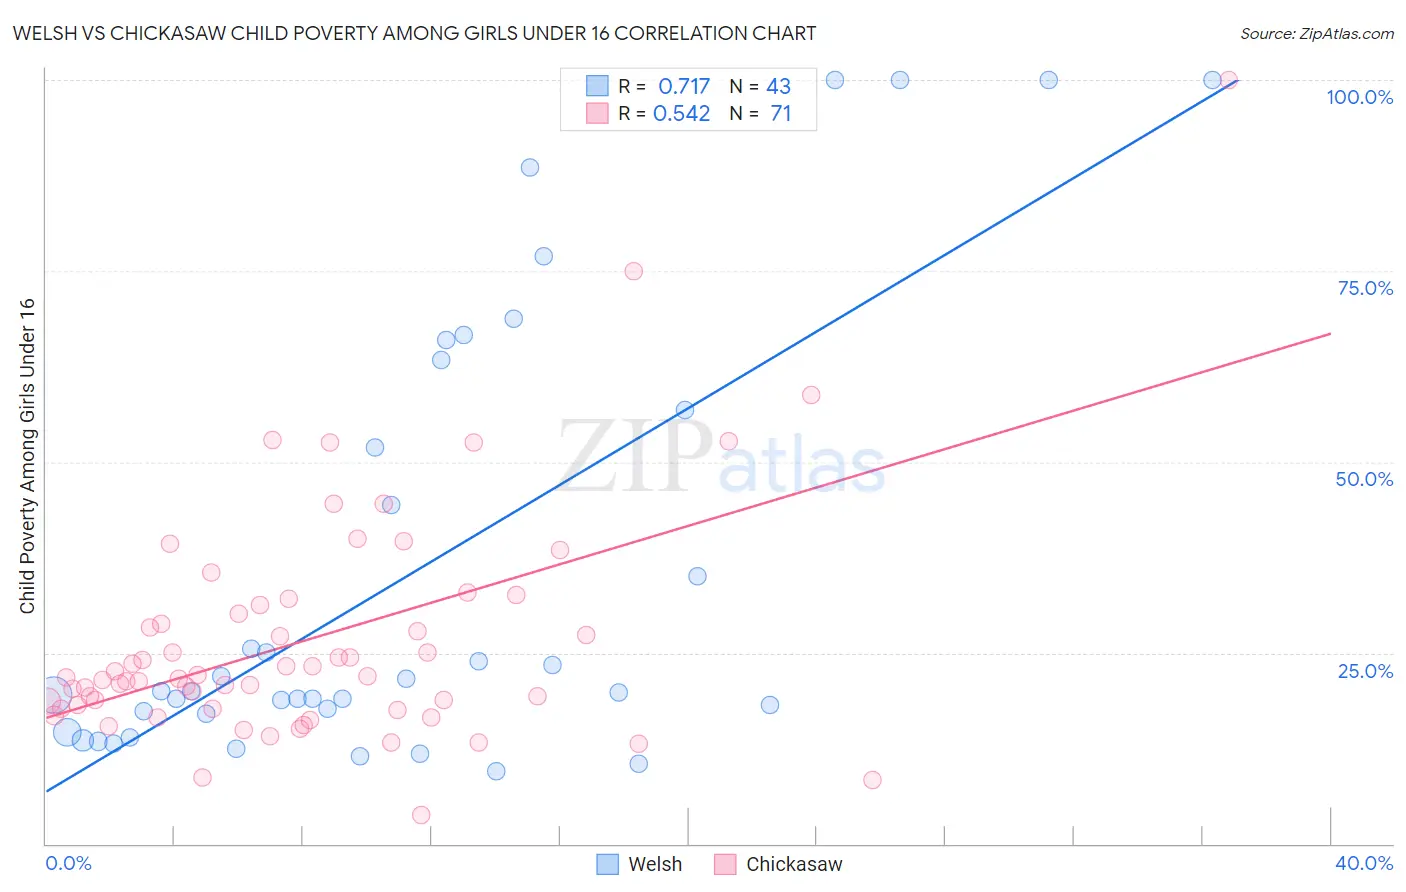 Welsh vs Chickasaw Child Poverty Among Girls Under 16